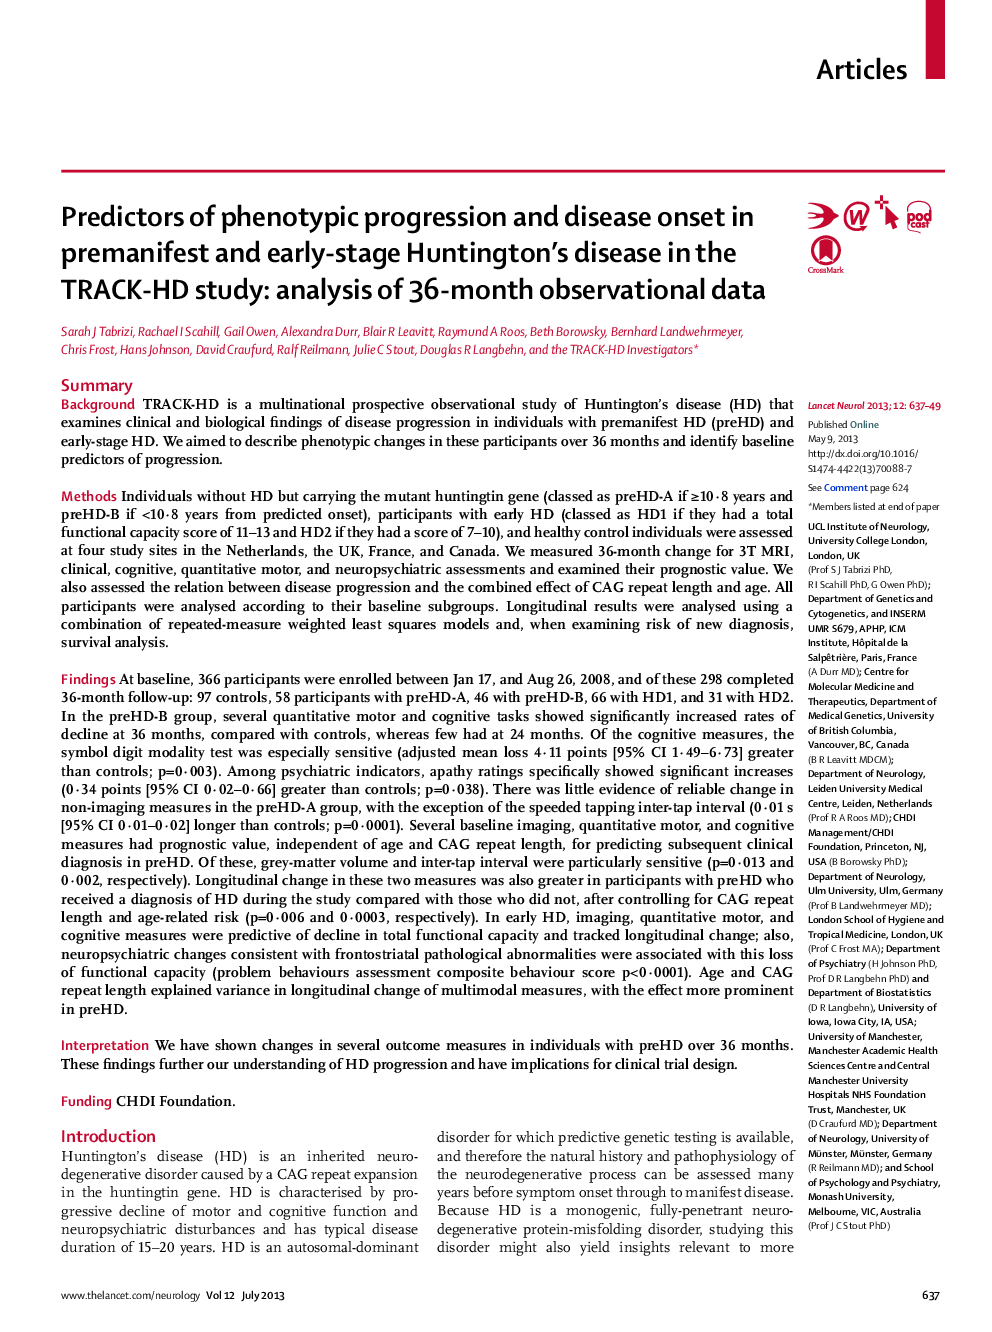 Predictors of phenotypic progression and disease onset in premanifest and early-stage Huntington's disease in the TRACK-HD study: analysis of 36-month observational data